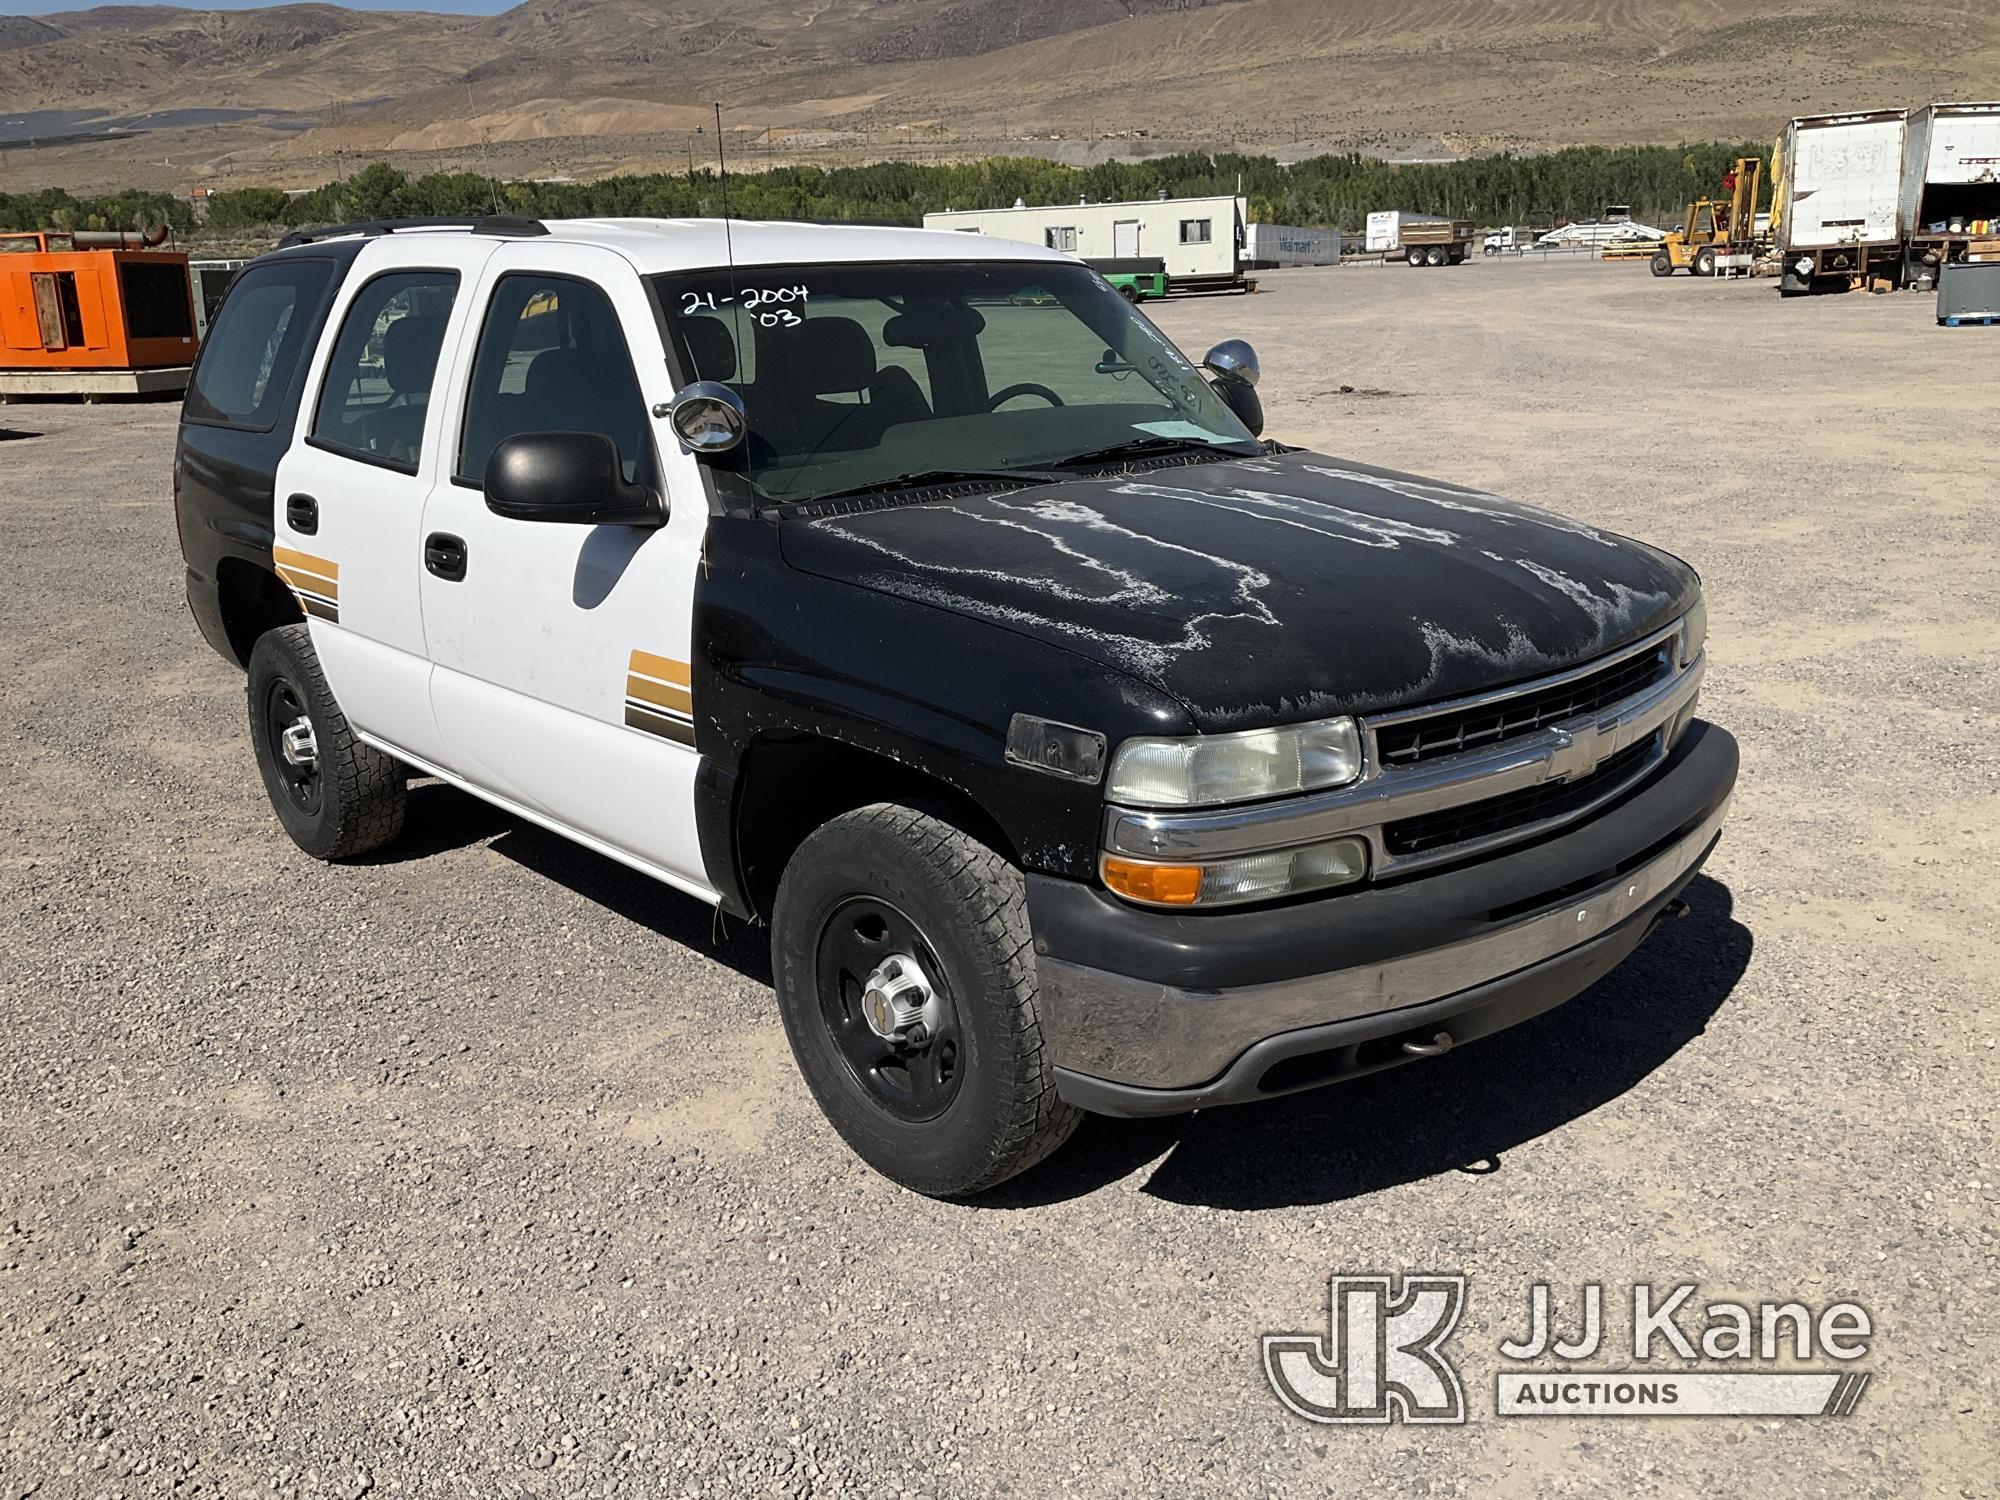 (McCarran, NV) 2003 Chevrolet Tahoe 4x4 4-Door Sport Utility Vehicle, Located In Reno Nv. Contact Na